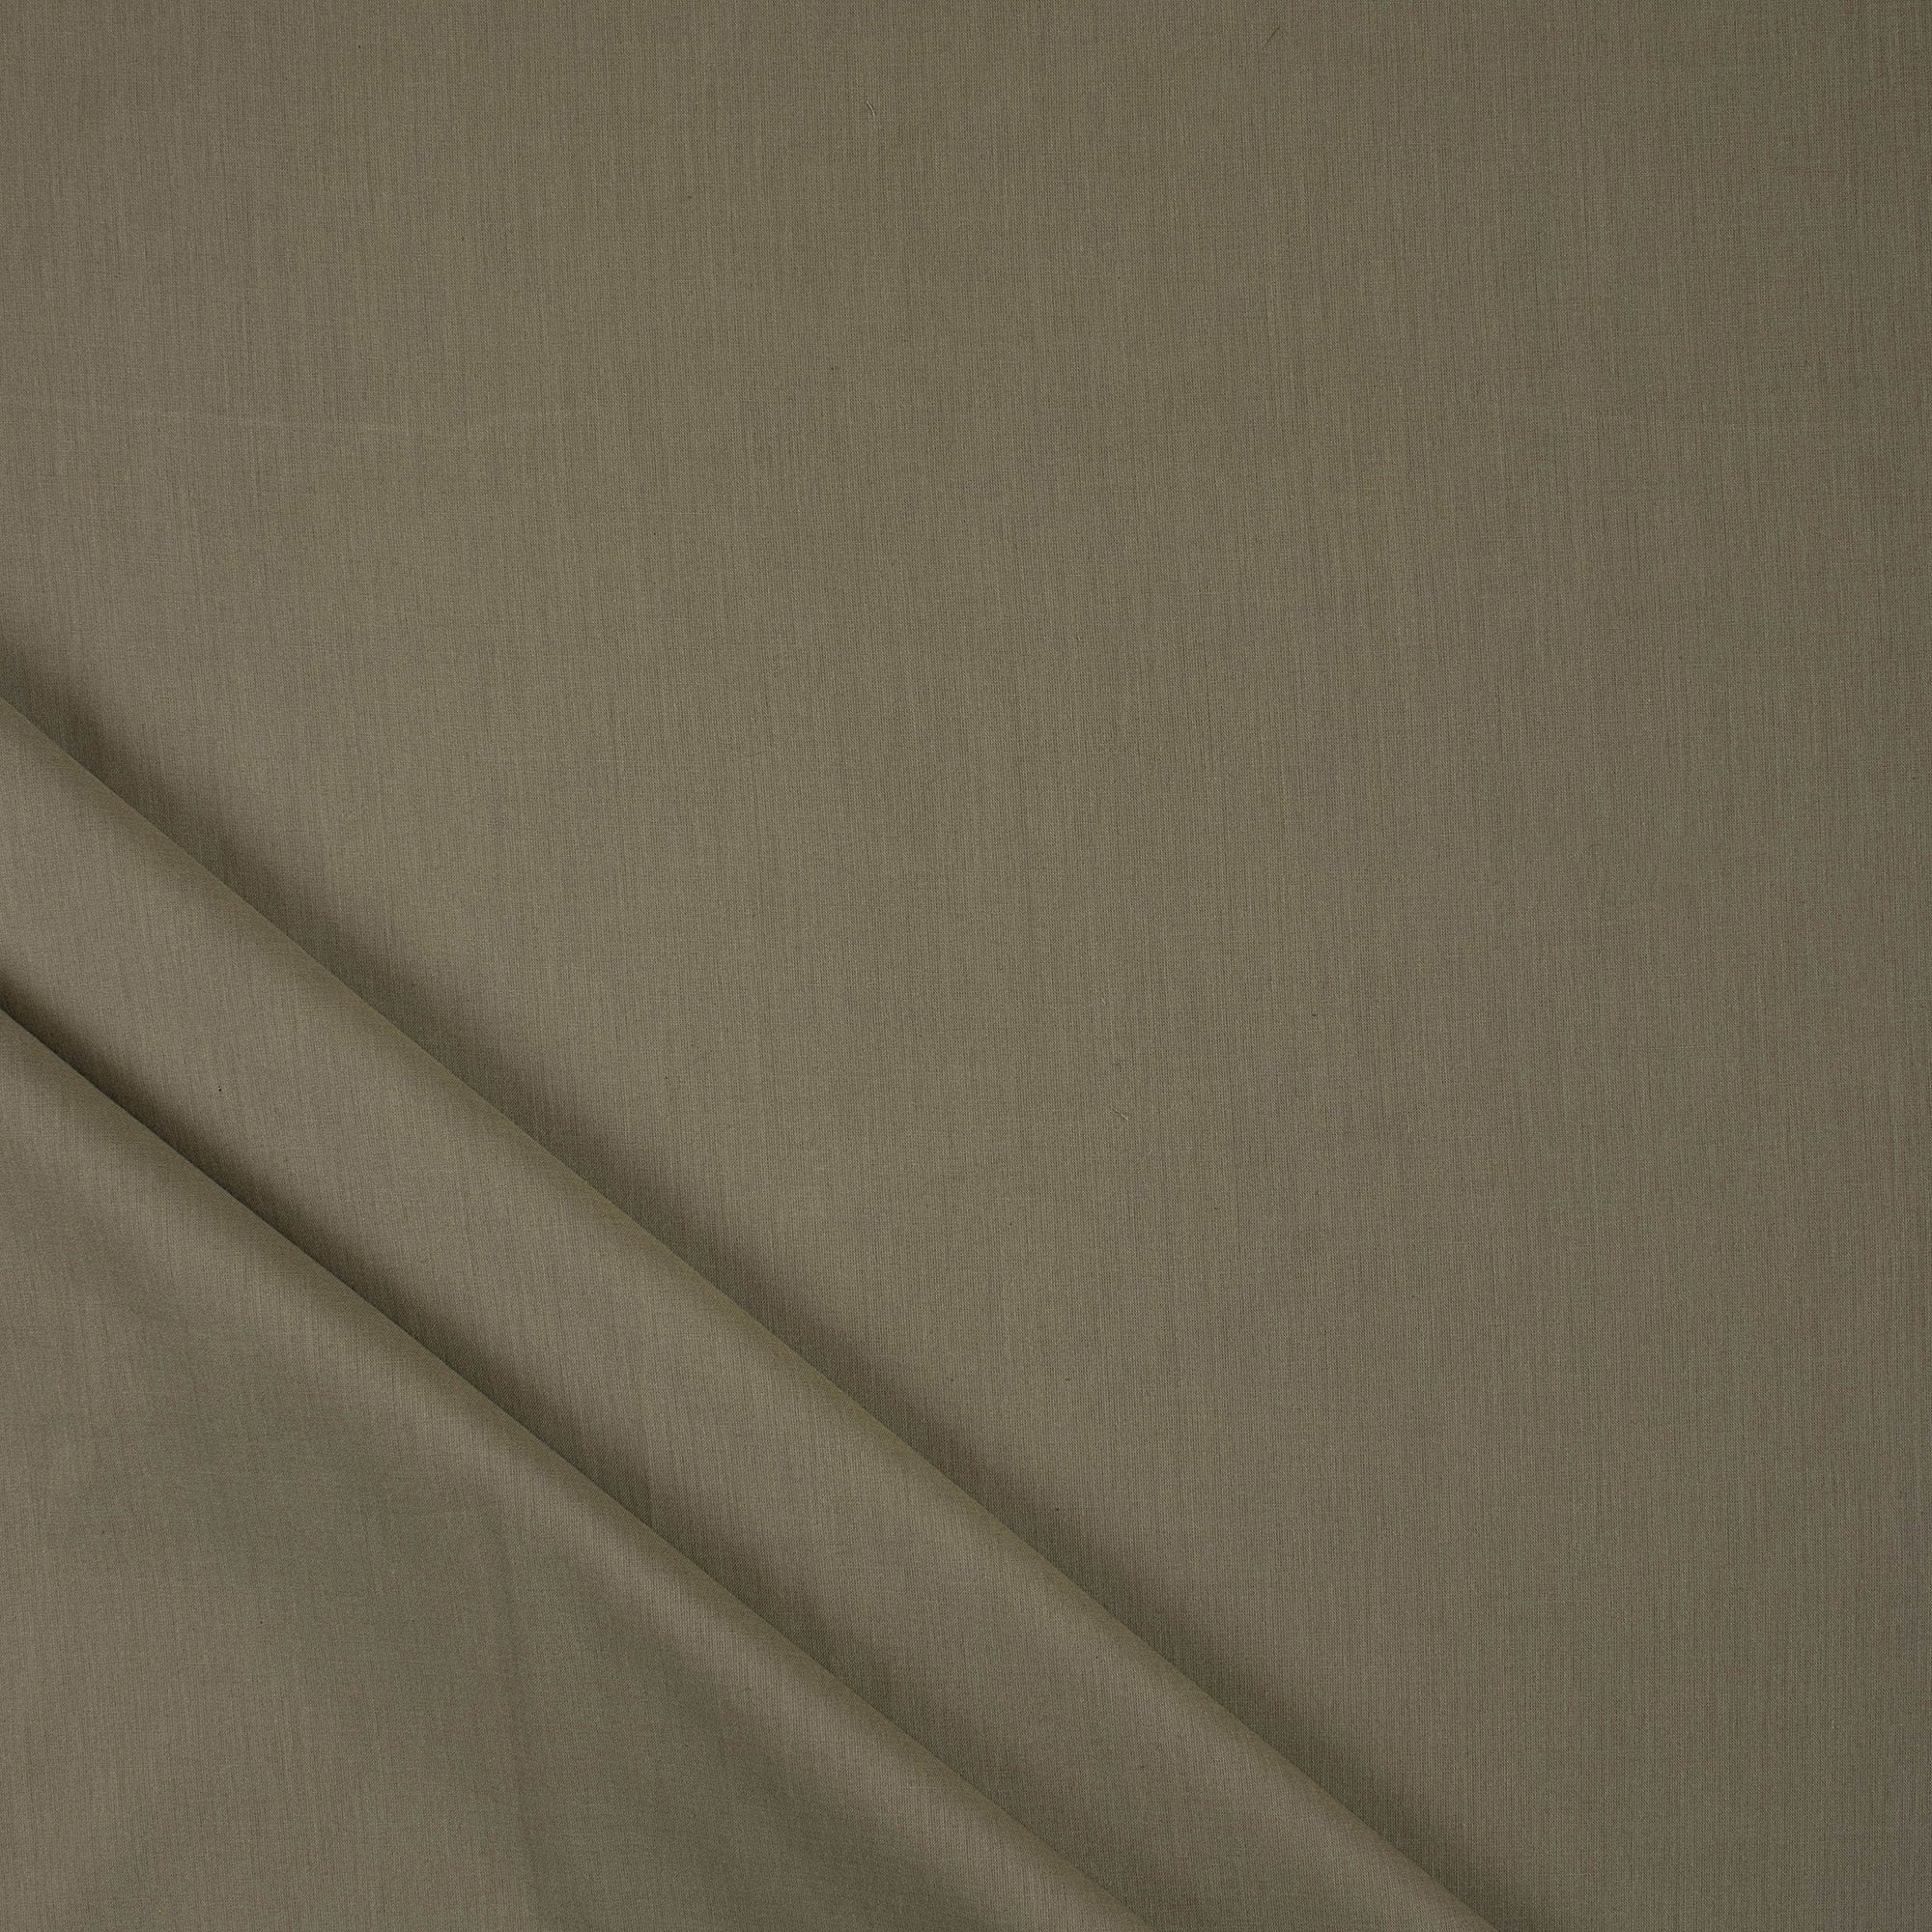 Grey Pure Cotton Natural Dyed Solid Plain Fabric Online